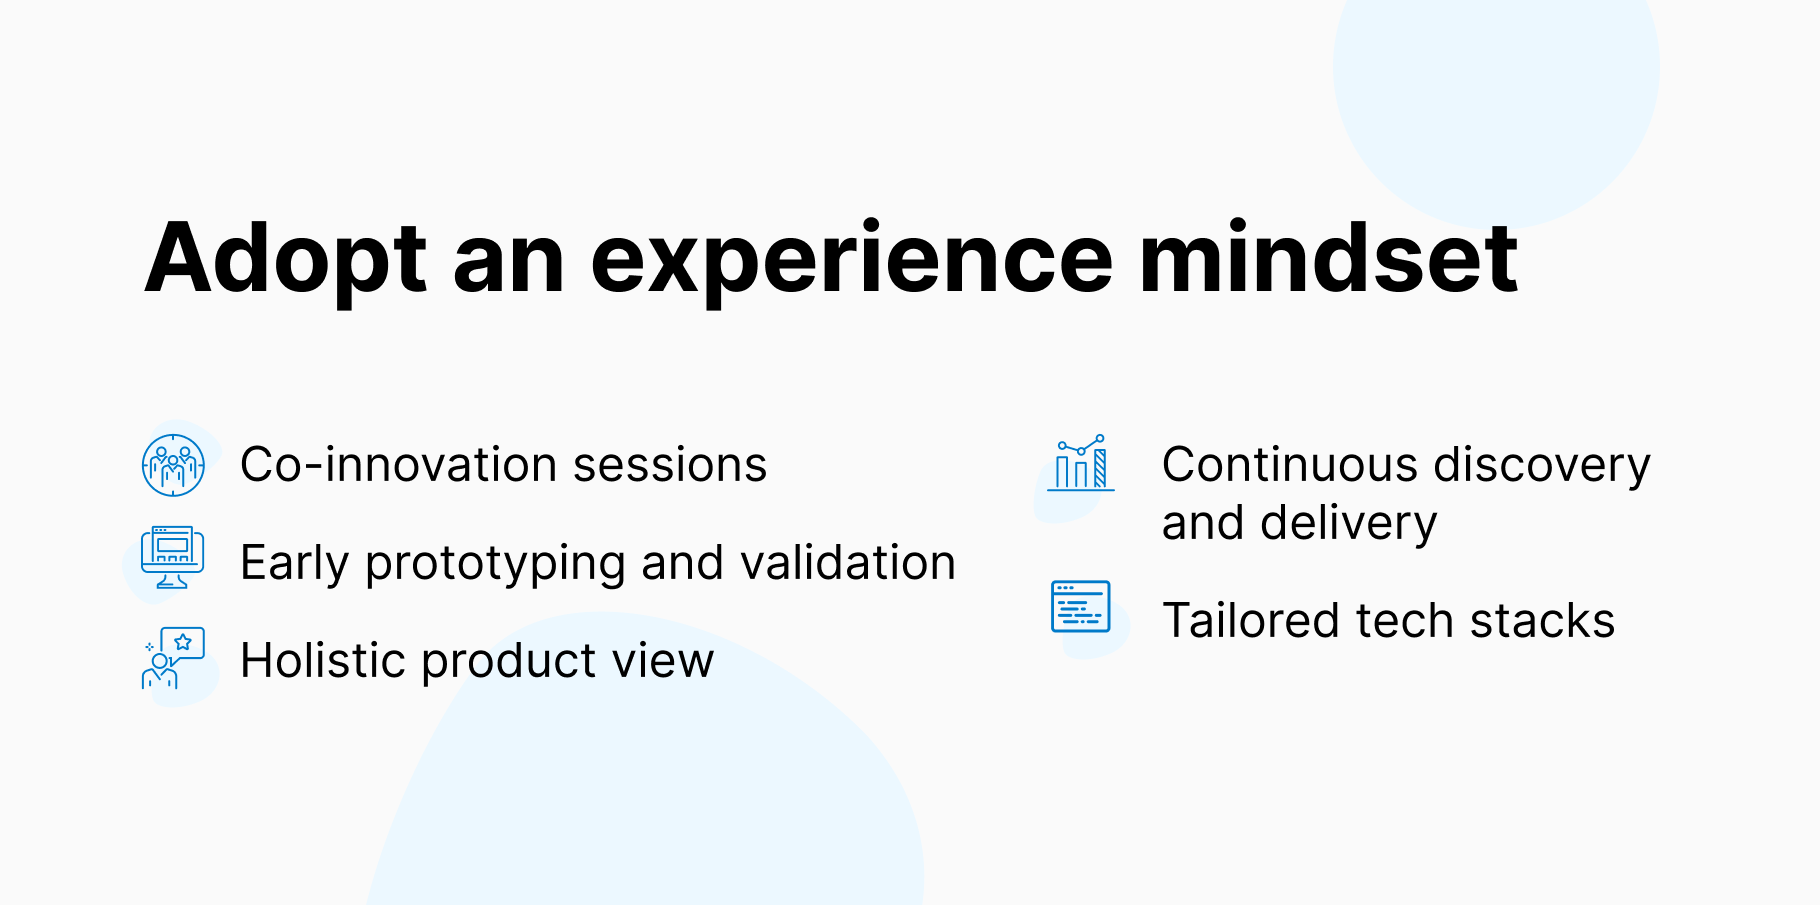 Adopt an experience mindset:
1. Co-innovation sessions
2. Early prototyping and validation
3. Holistic product view
4. Continuous discovery and delivery
5. Tailored tech stacks